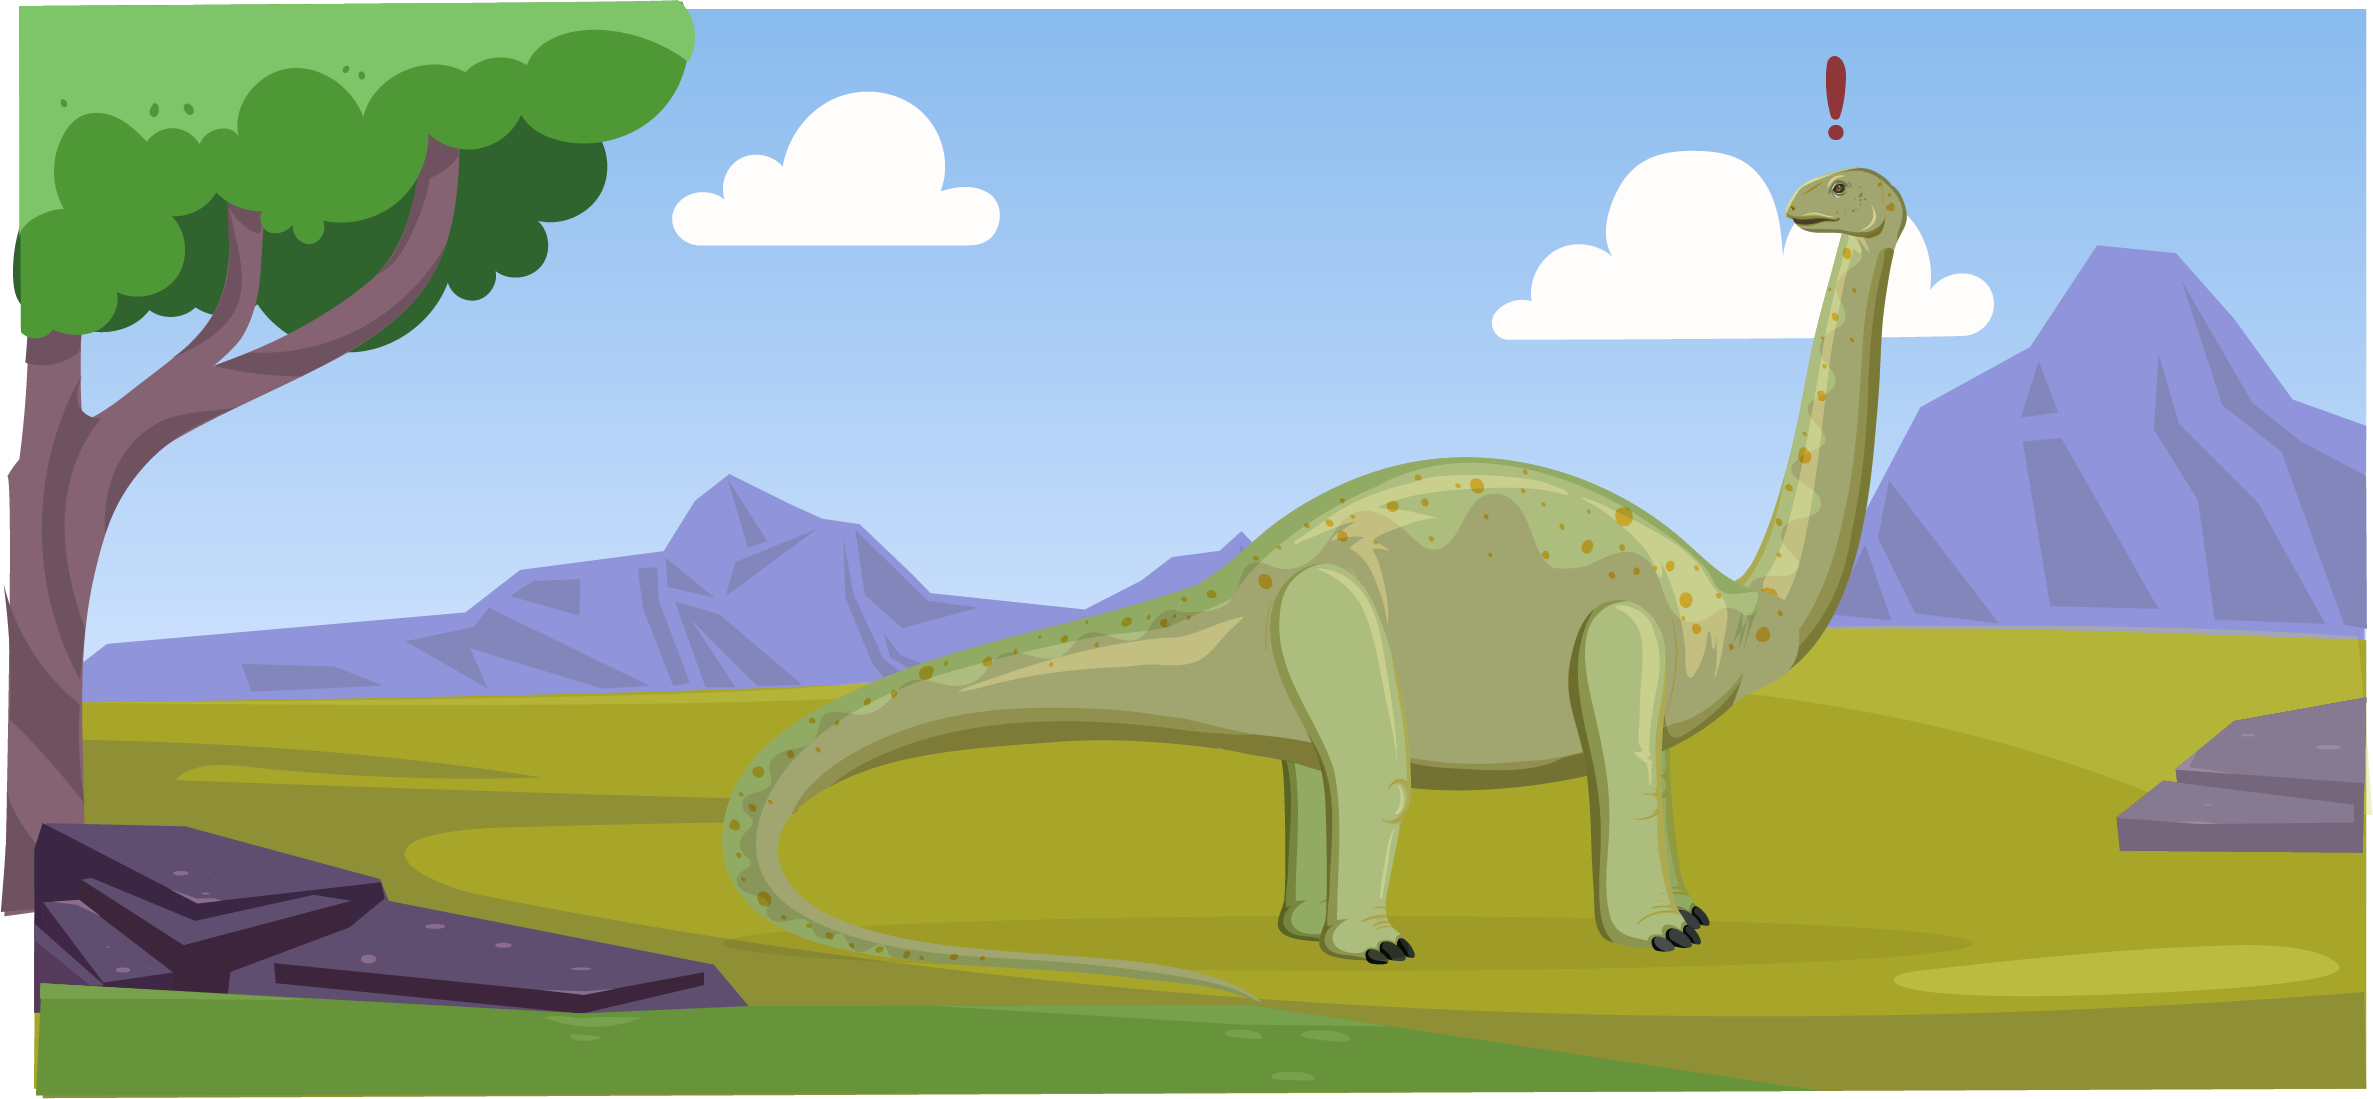 Brontosaurus Facts for Kids